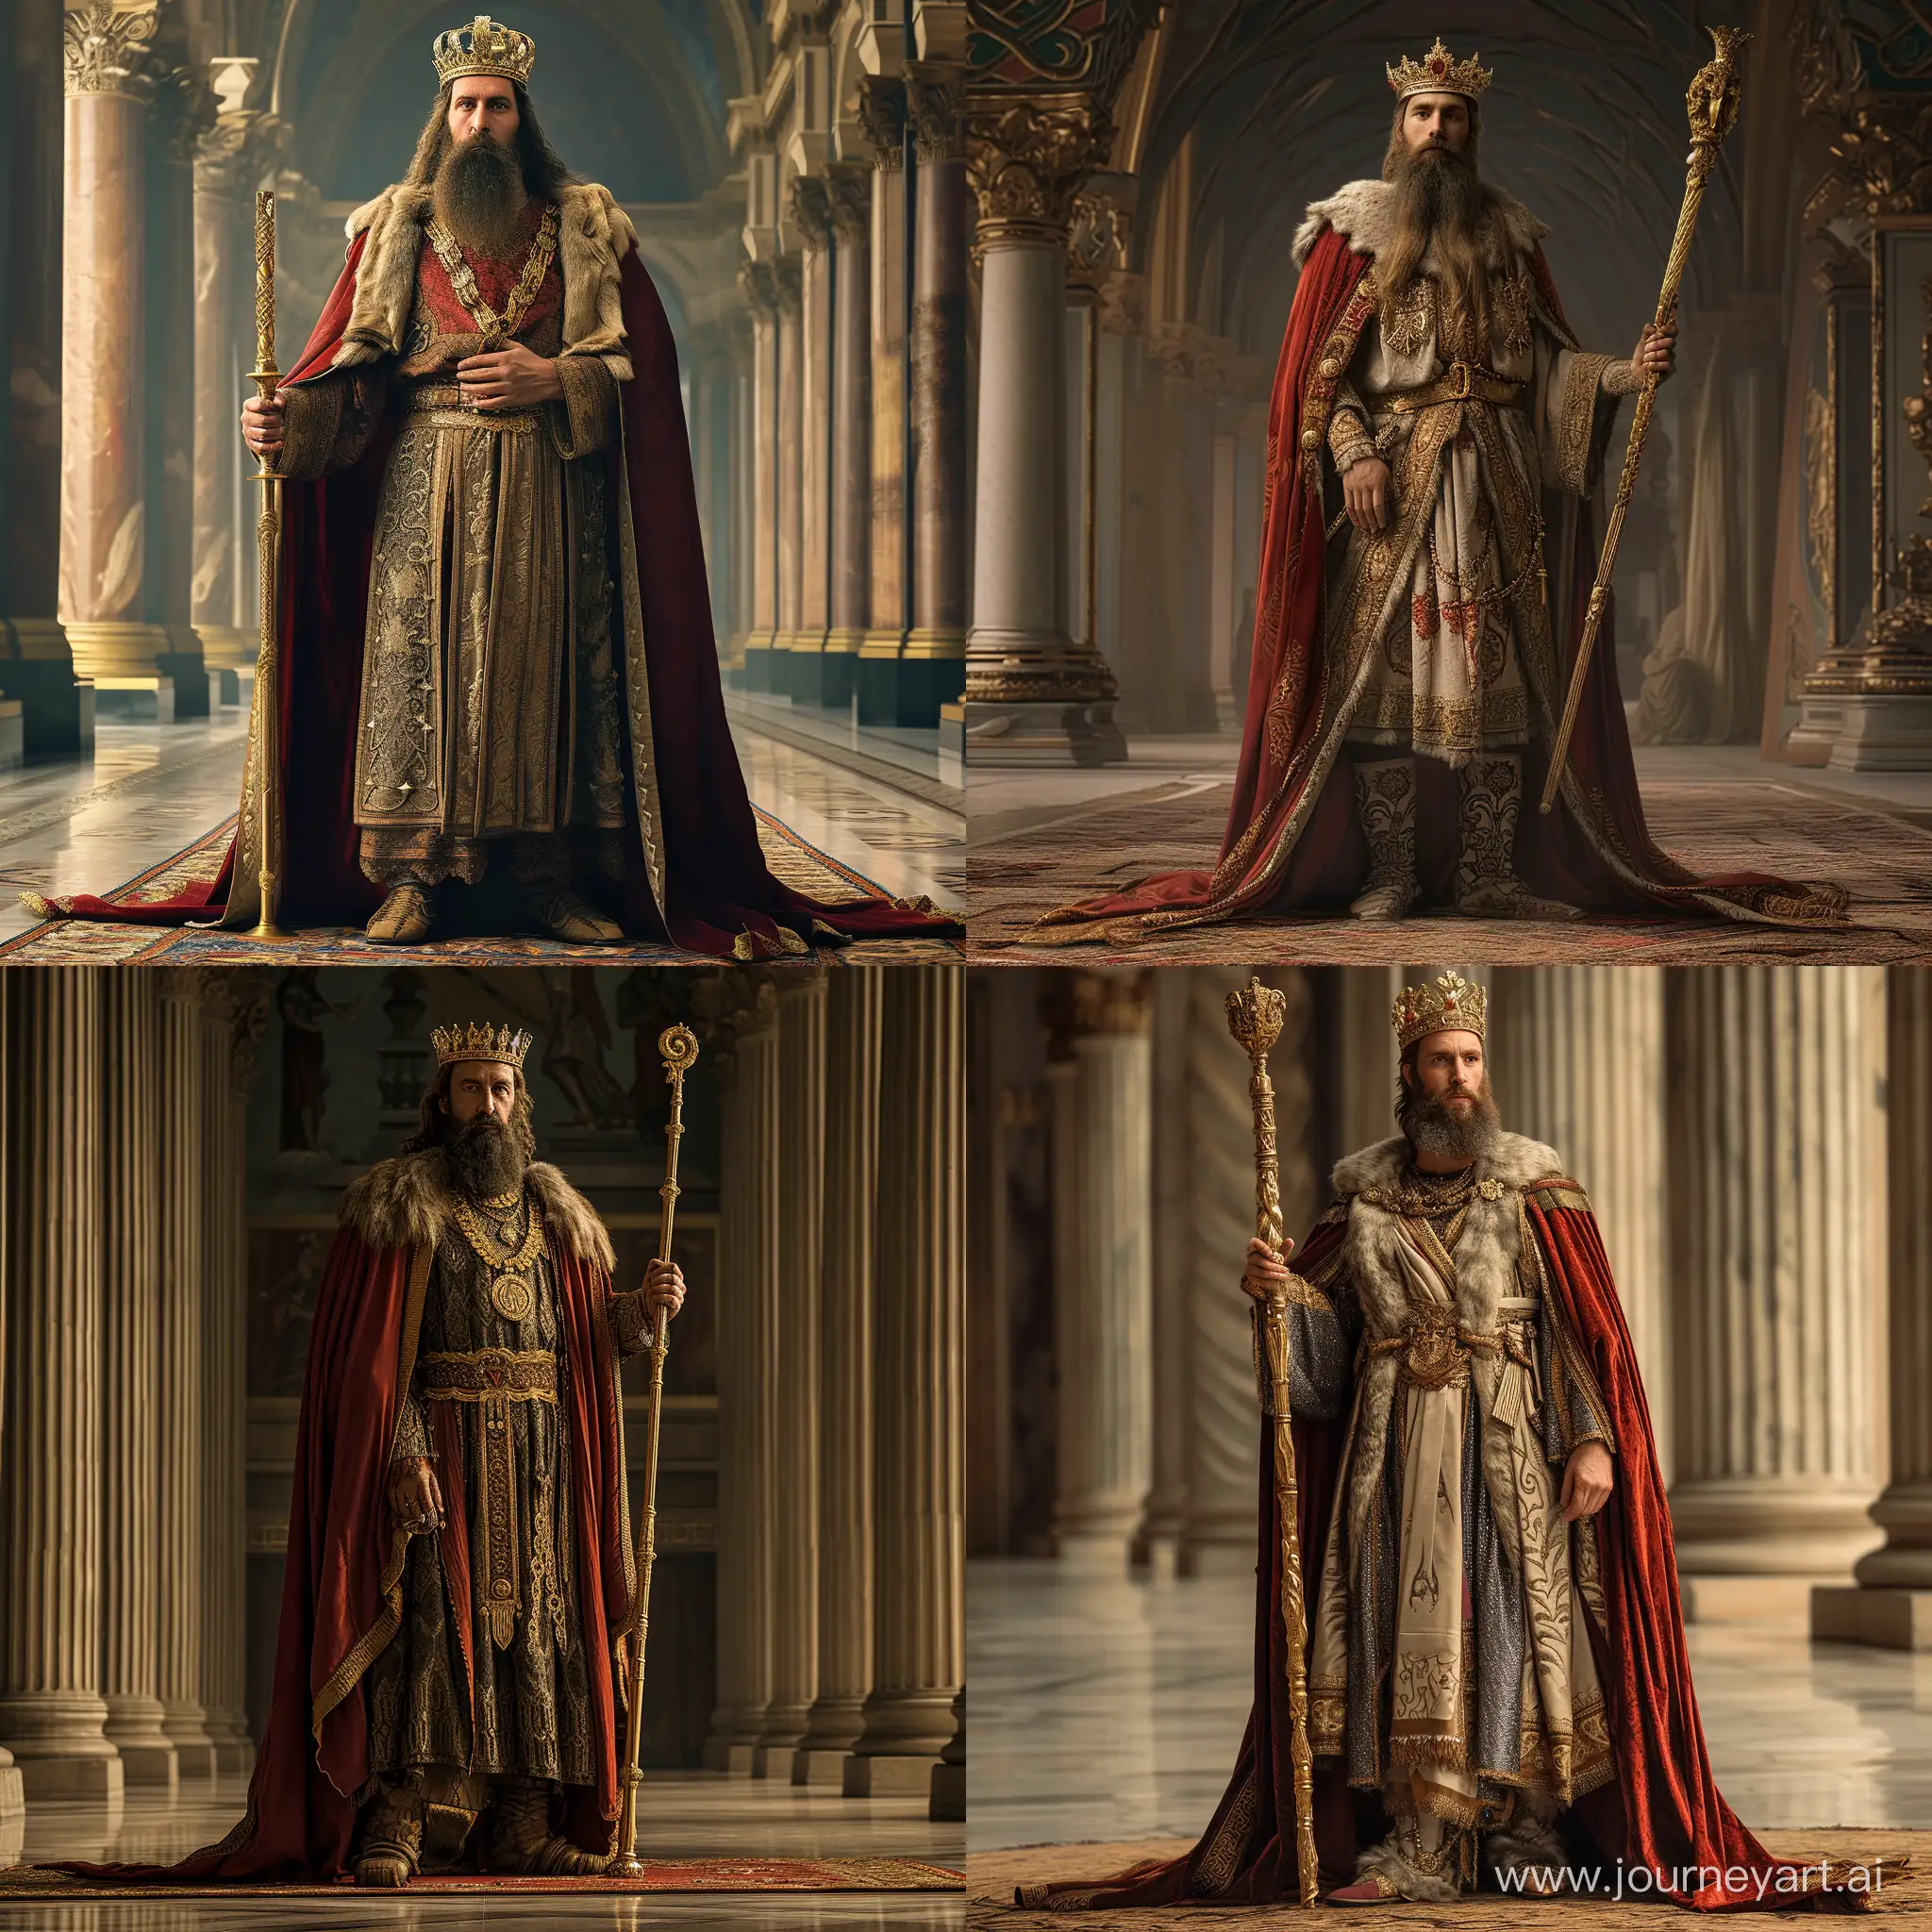 Clovis-I-King-of-the-Franks-in-Regal-Attire-with-Golden-Crown-and-Staff